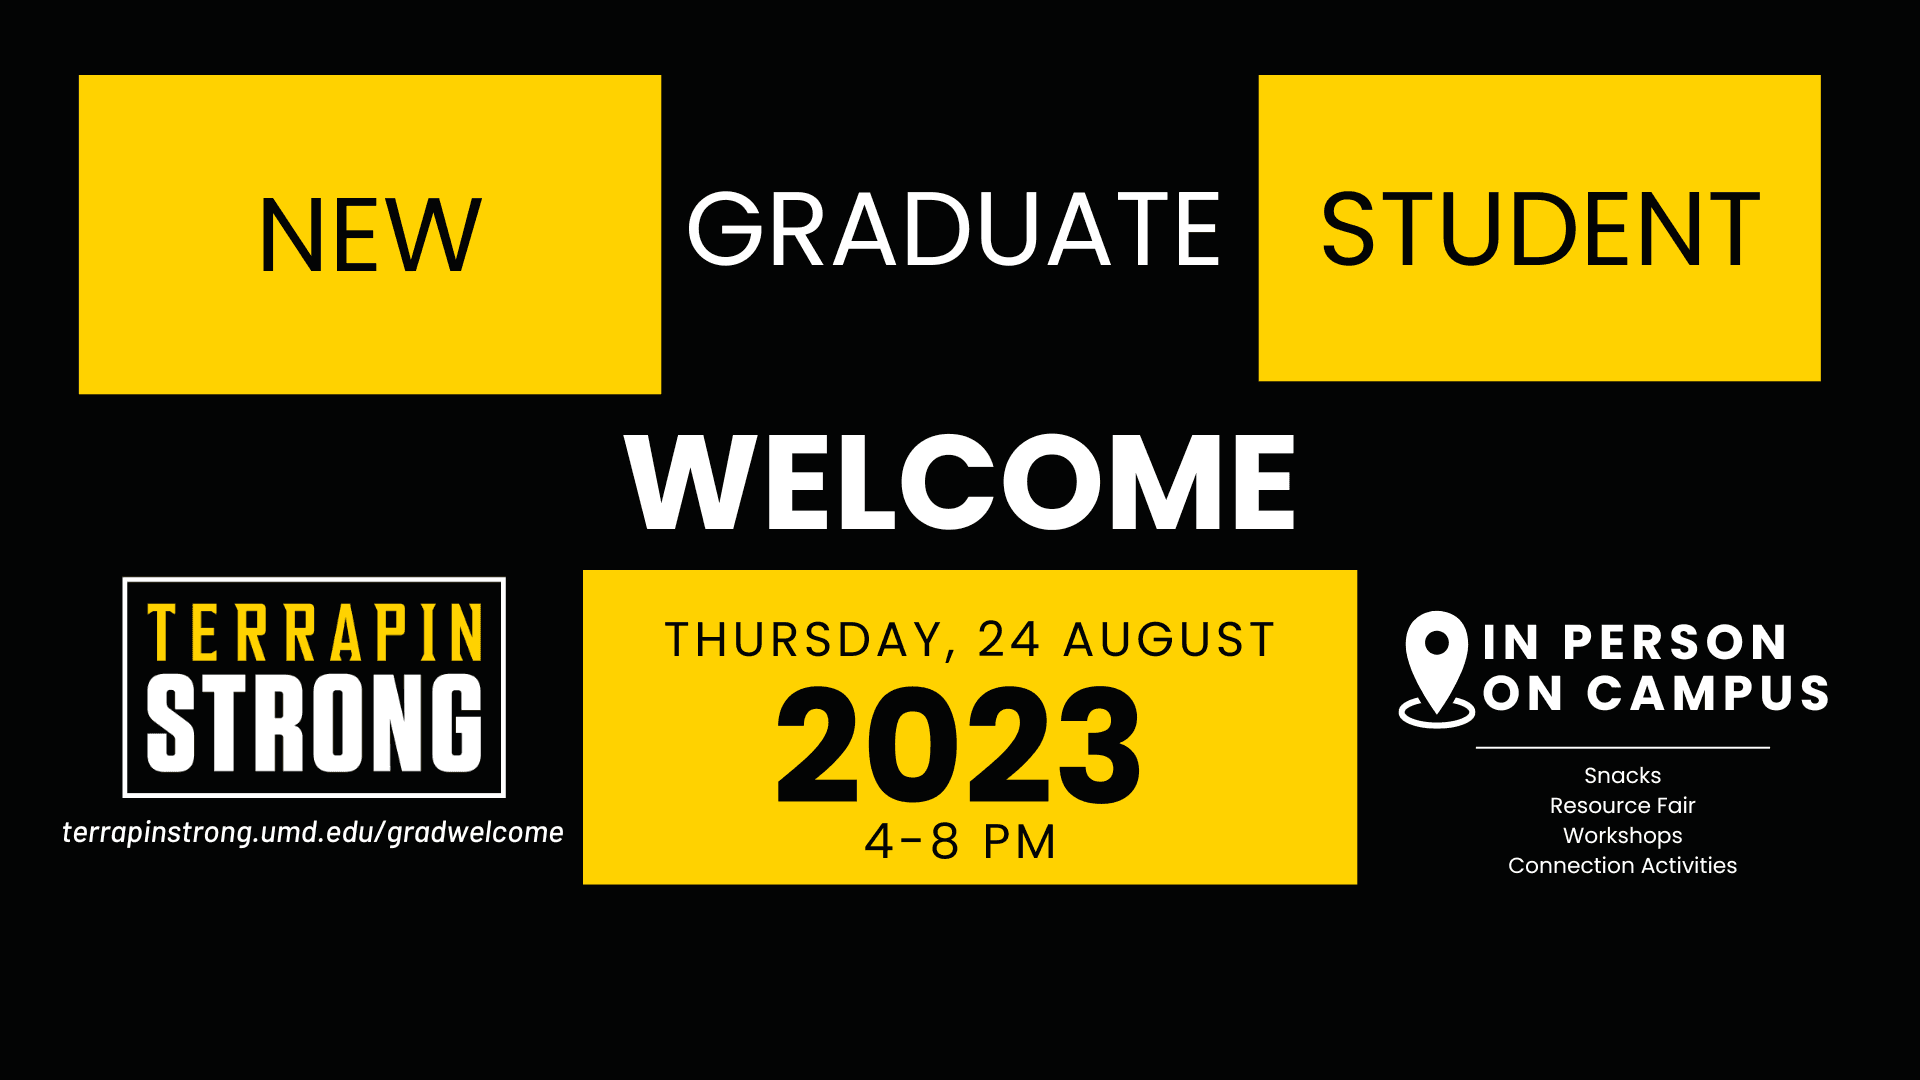 New Graduate Student Welcome Thursday, August 24, 2023, 4-8pm in person on campus. Snacks. Resource Fair. Workshops. Connection Activities. Terrapinstrong.umd.edu/gradwelcome